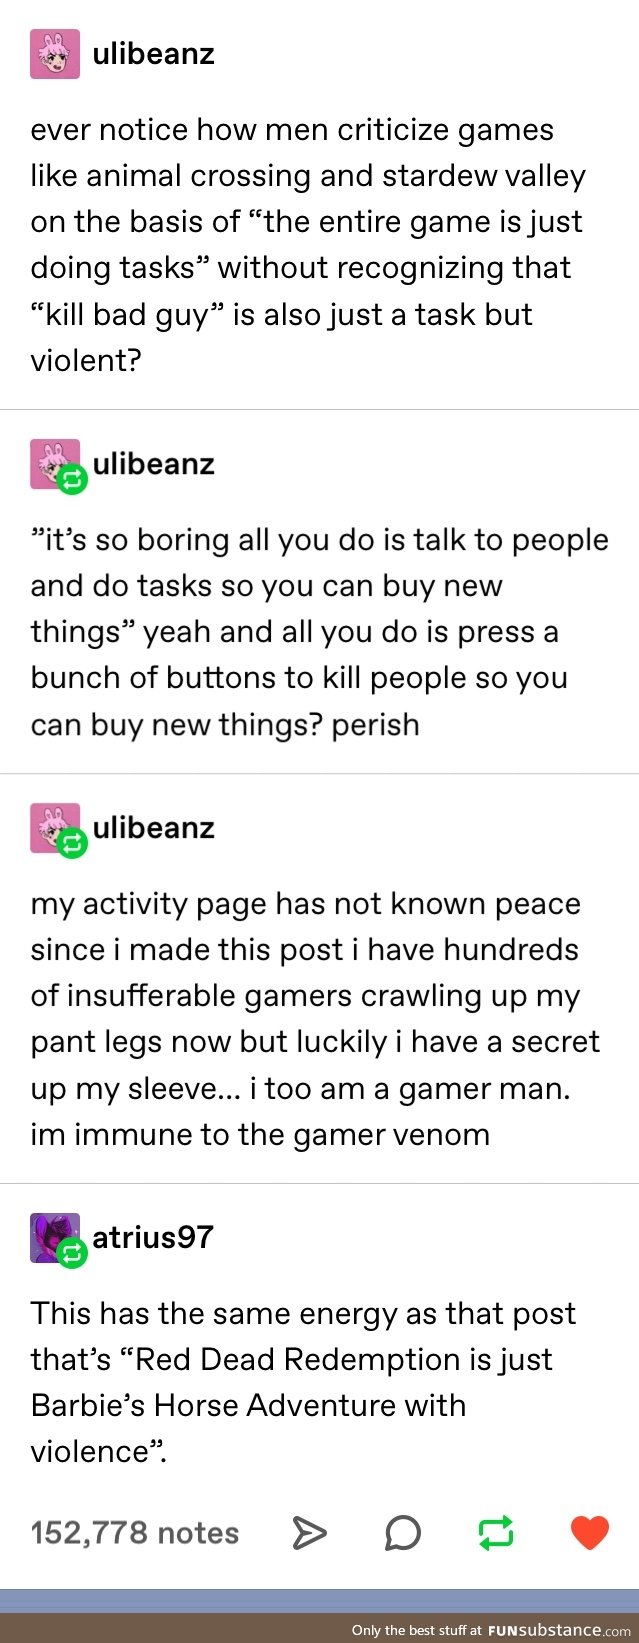 Games are about having fun, let people enjoy things